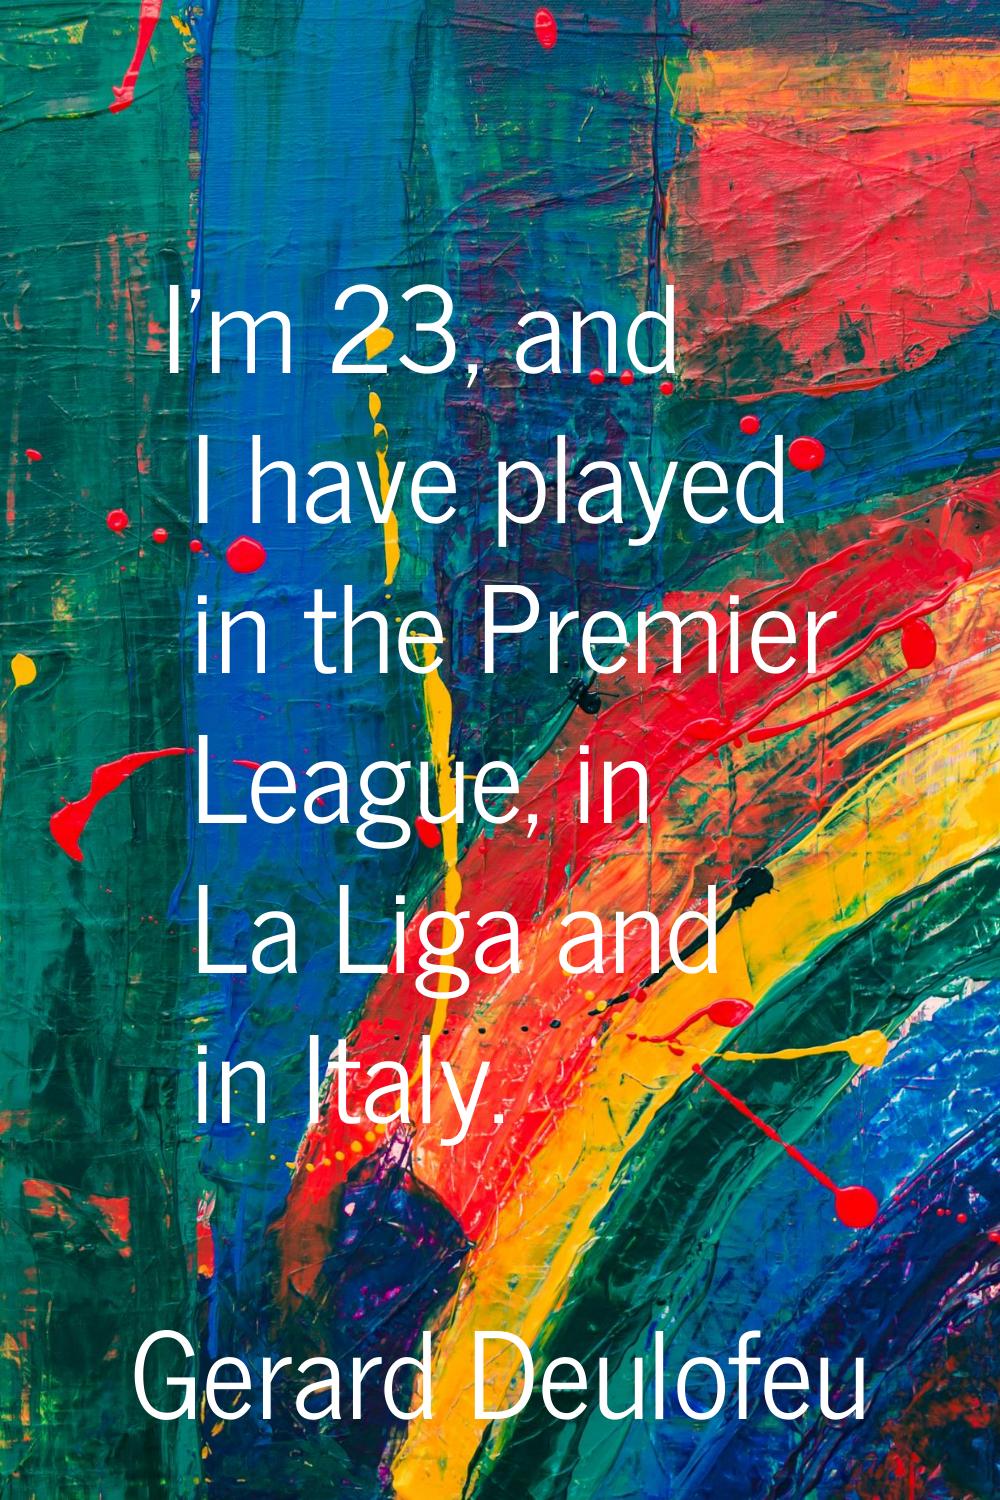 I'm 23, and I have played in the Premier League, in La Liga and in Italy.